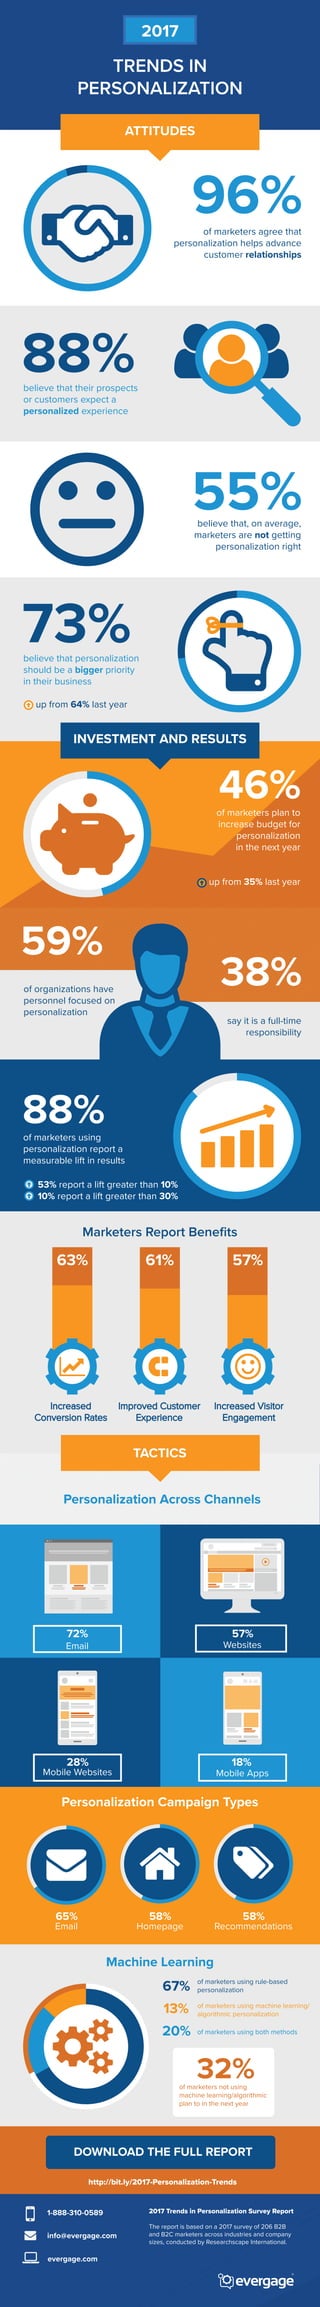 TRENDS IN
PERSONALIZATION
of marketers plan to
increase budget for
personalization
in the next year
up from 35% last year
believe that their prospects
or customers expect a
personalized experience
of marketers agree that
personalization helps advance
customer relationships
2017 Trends in Personalization Survey Report
The report is based on a 2017 survey of 206 B2B
and B2C marketers across industries and company
sizes, conducted by Researchscape International.
1-888-310-0589
info@evergage.com
evergage.com
ATTITUDES
INVESTMENT AND RESULTS
Websites
Mobile Apps
Email
72% 57%
18%
TACTICS
of respondents believe
personalization should be a
greater priority in their
organizations
DOWNLOAD THE FULL REPORT
http://bit.ly/2017-Personalization-Trends
2017
96%
believe that, on average,
marketers are not getting
personalization right
55%
88%
believe that personalization
should be a bigger priority
in their business
up from 64% last year
73%
46%
of organizations have
personnel focused on
personalization
59%
38%
of marketers using
personalization report a
measurable lift in results
88%
say it is a full-time
responsibility
of marketers using rule-based
personalization
of marketers using both methods
of marketers using machine learning/
algorithmic personalization
53% report a lift greater than 10%
10% report a lift greater than 30%
Mobile Websites
28%
Email
65%
Homepage
58%
Recommendations
58%
Personalization Across Channels
Personalization Campaign Types
Machine Learning
of marketers not using
machine learning/algorithmic
plan to in the next year
67%
20%
13%
32%
Improved Customer
Experience
Marketers Report Beneﬁts
Increased Visitor
Engagement
Increased
Conversion Rates
63% 61% 57%
 